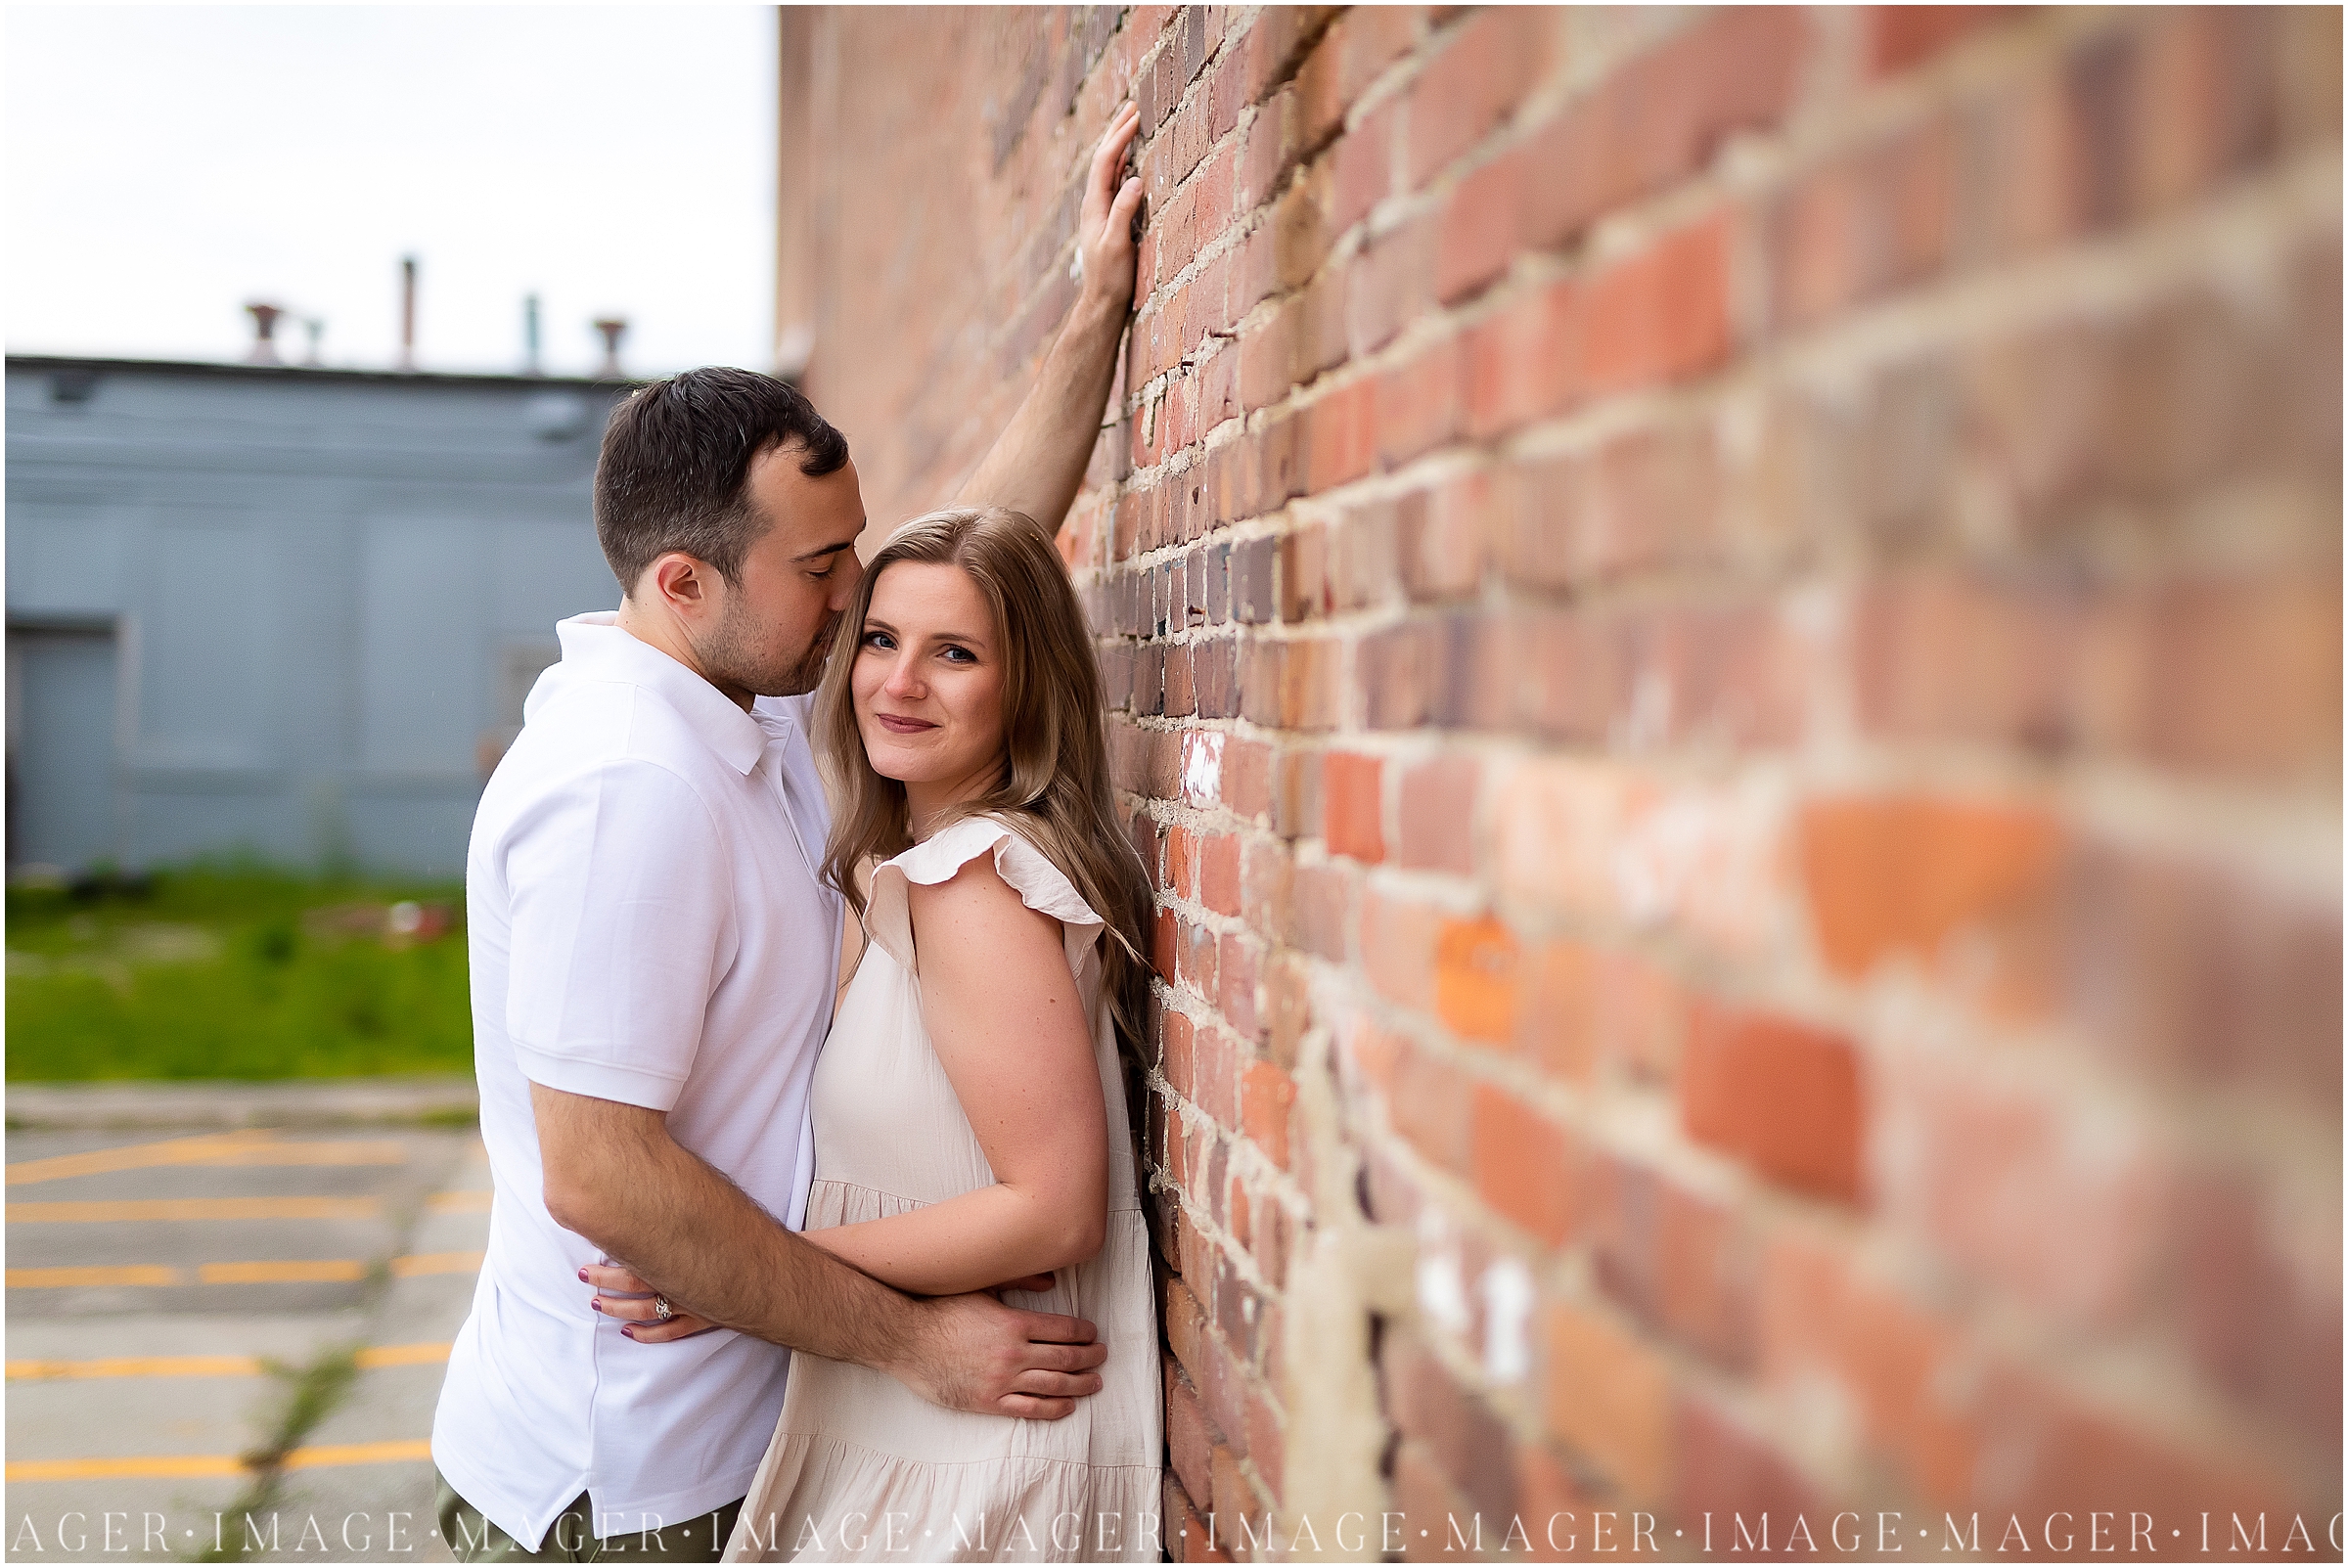 A couple embraces each other, the woman looking the camera while leaning against a wall and the man looking at her. Set by a brick wall in downtown Danville, IL.

Photo taken by Mager Image Photography 